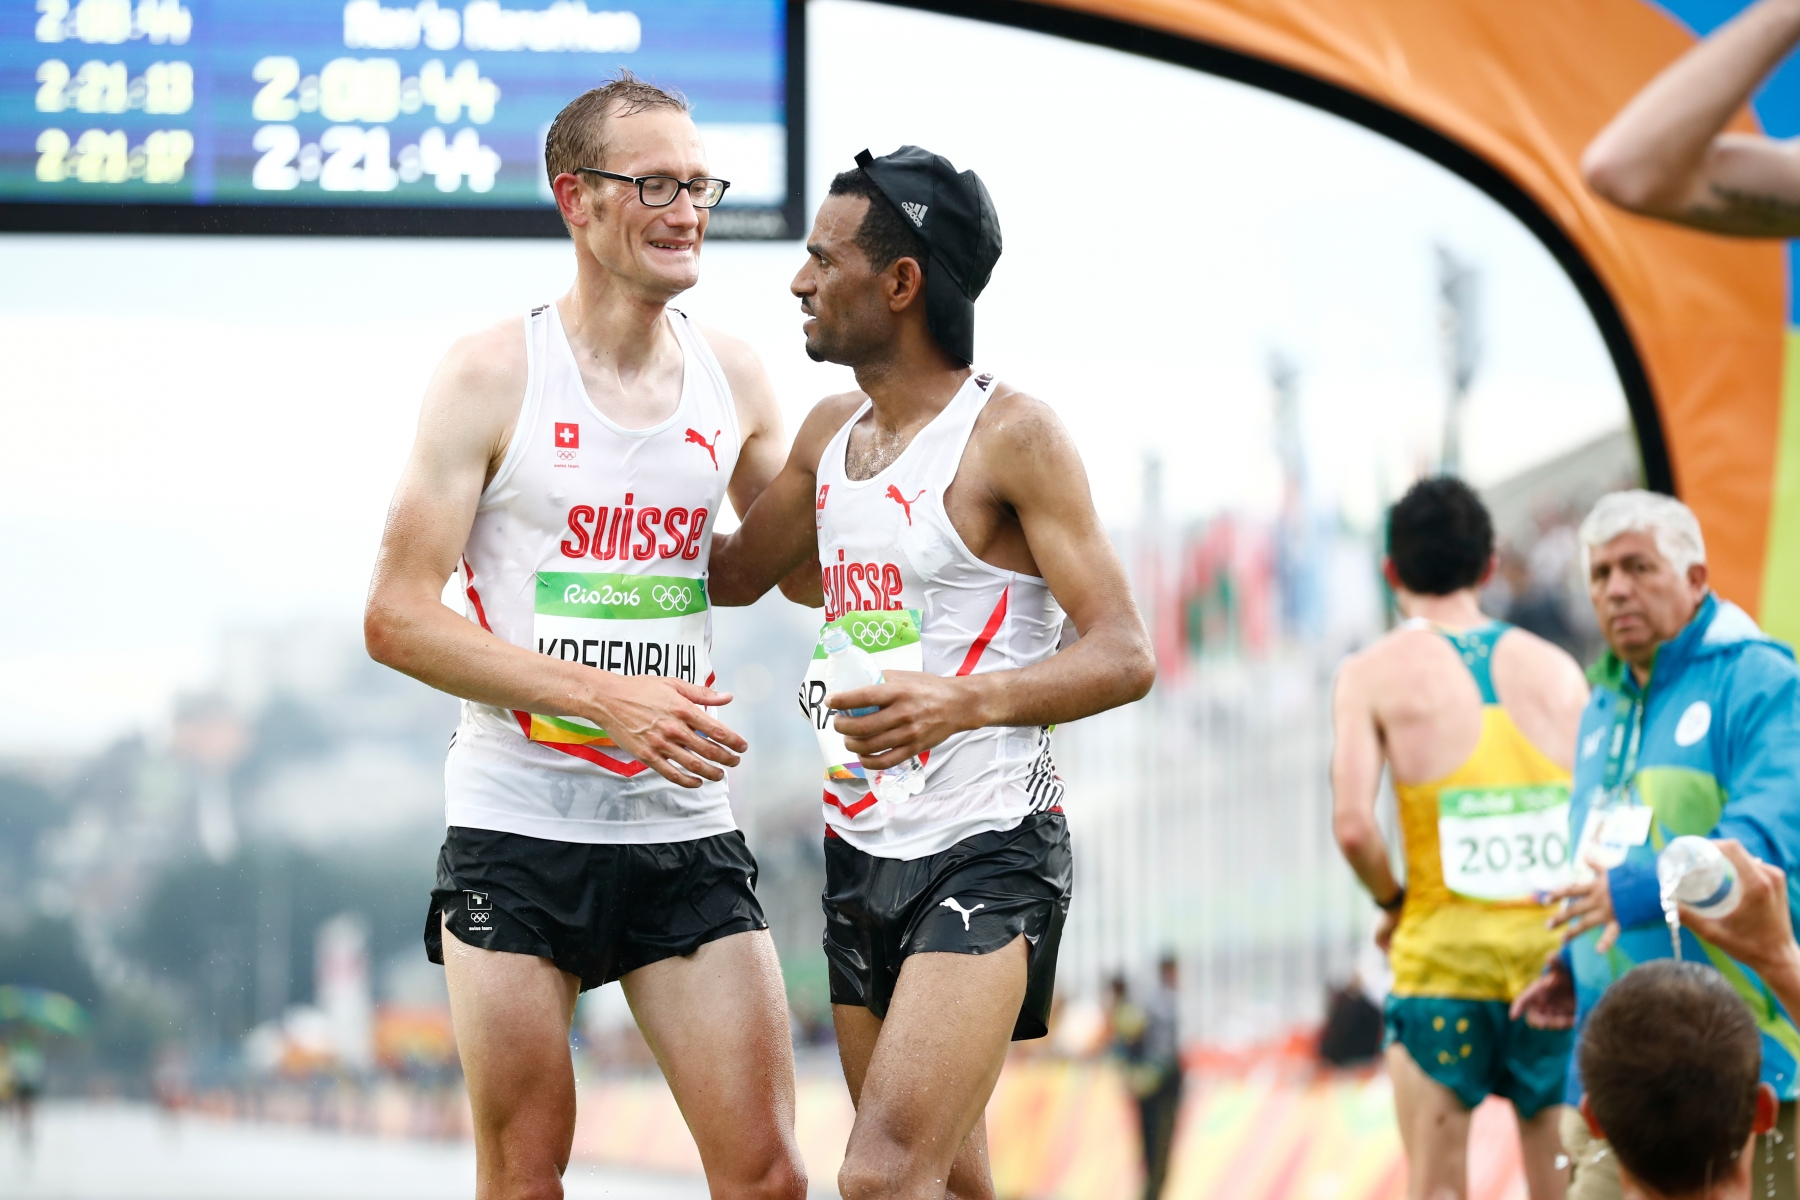 Tadesse Abraham of Switzerland, right, and Christian Kreienbuhl of Switzerland, left, in the men's Marathon race of the Rio 2016 Olympic Games Athletics, Track and Field events at the Sambodromo in Rio de Janeiro, Brazil, 21 August 2016. (KEYSTONE/EPA/Franck Robichon) BRAZIL RIO 2016 OLYMPIC GAMES